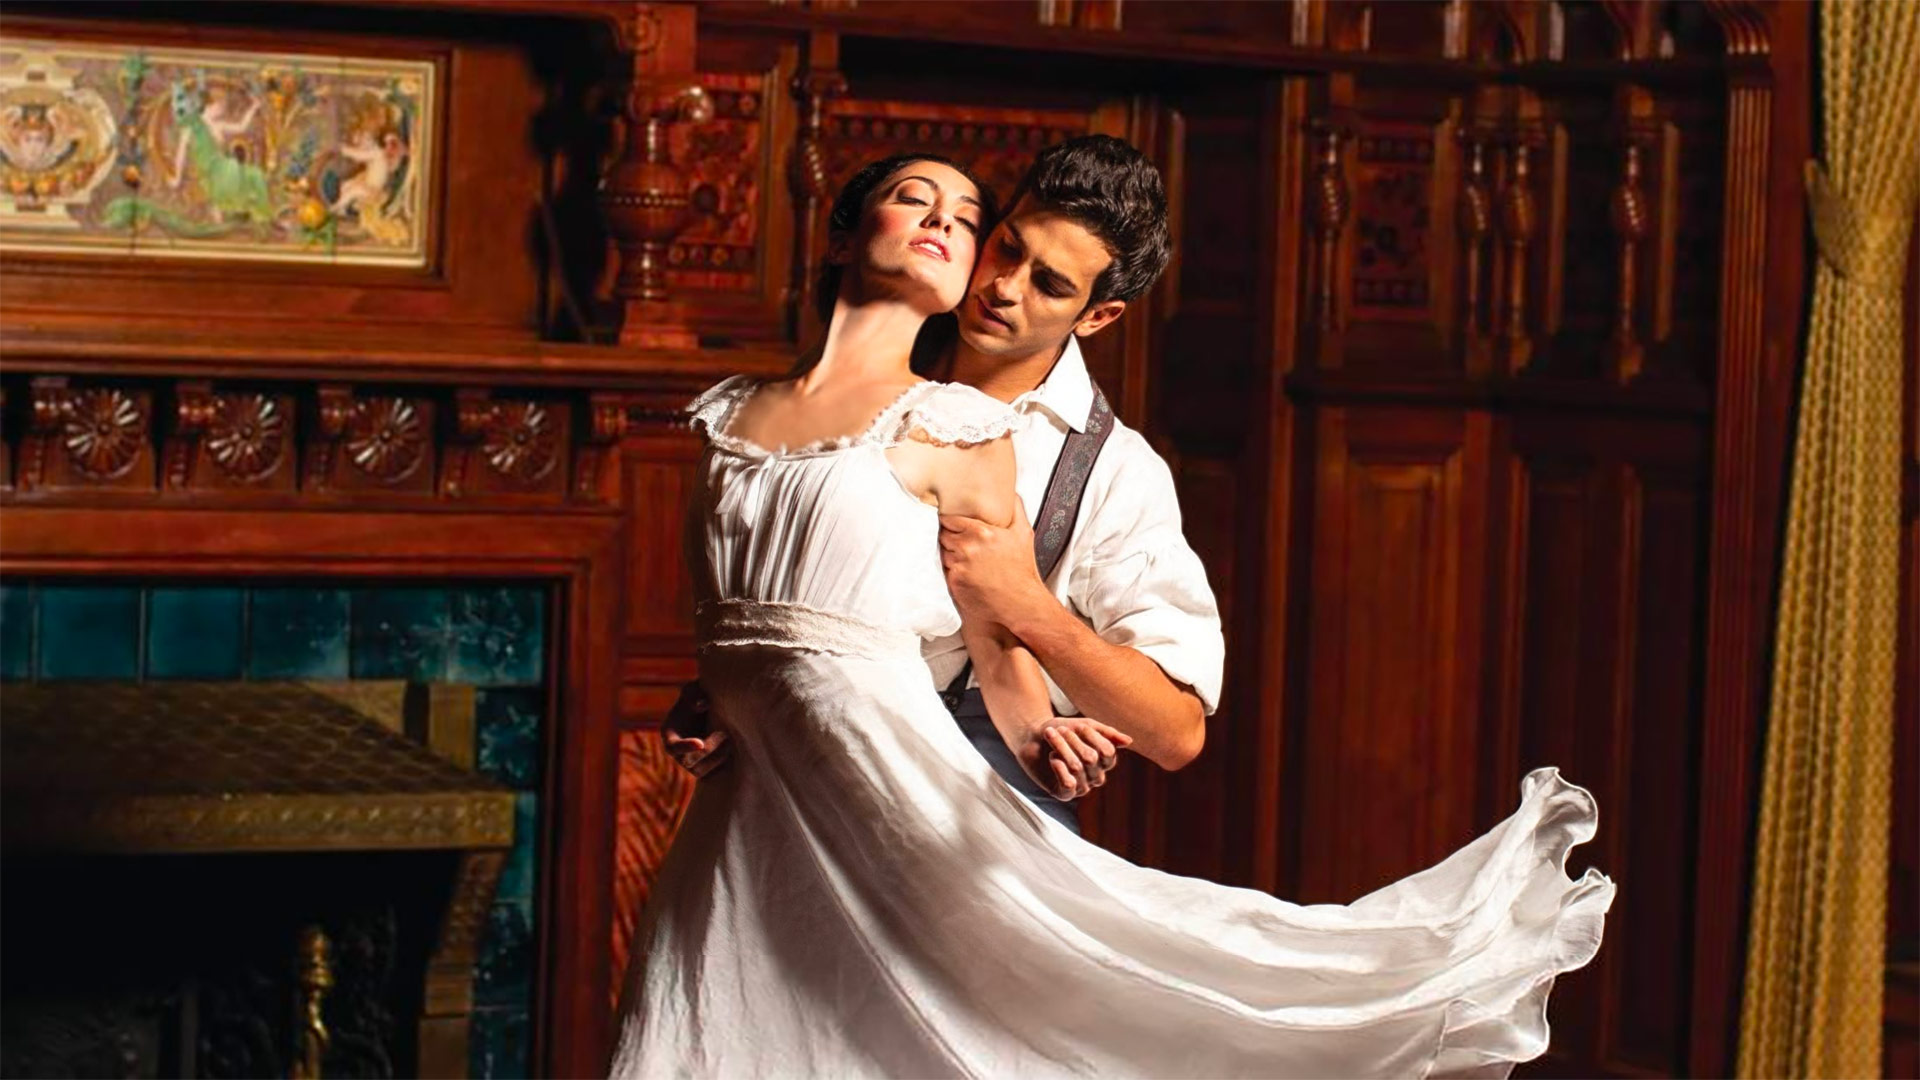 A couple in white dance in a dramatically lit mahogany-paneled room